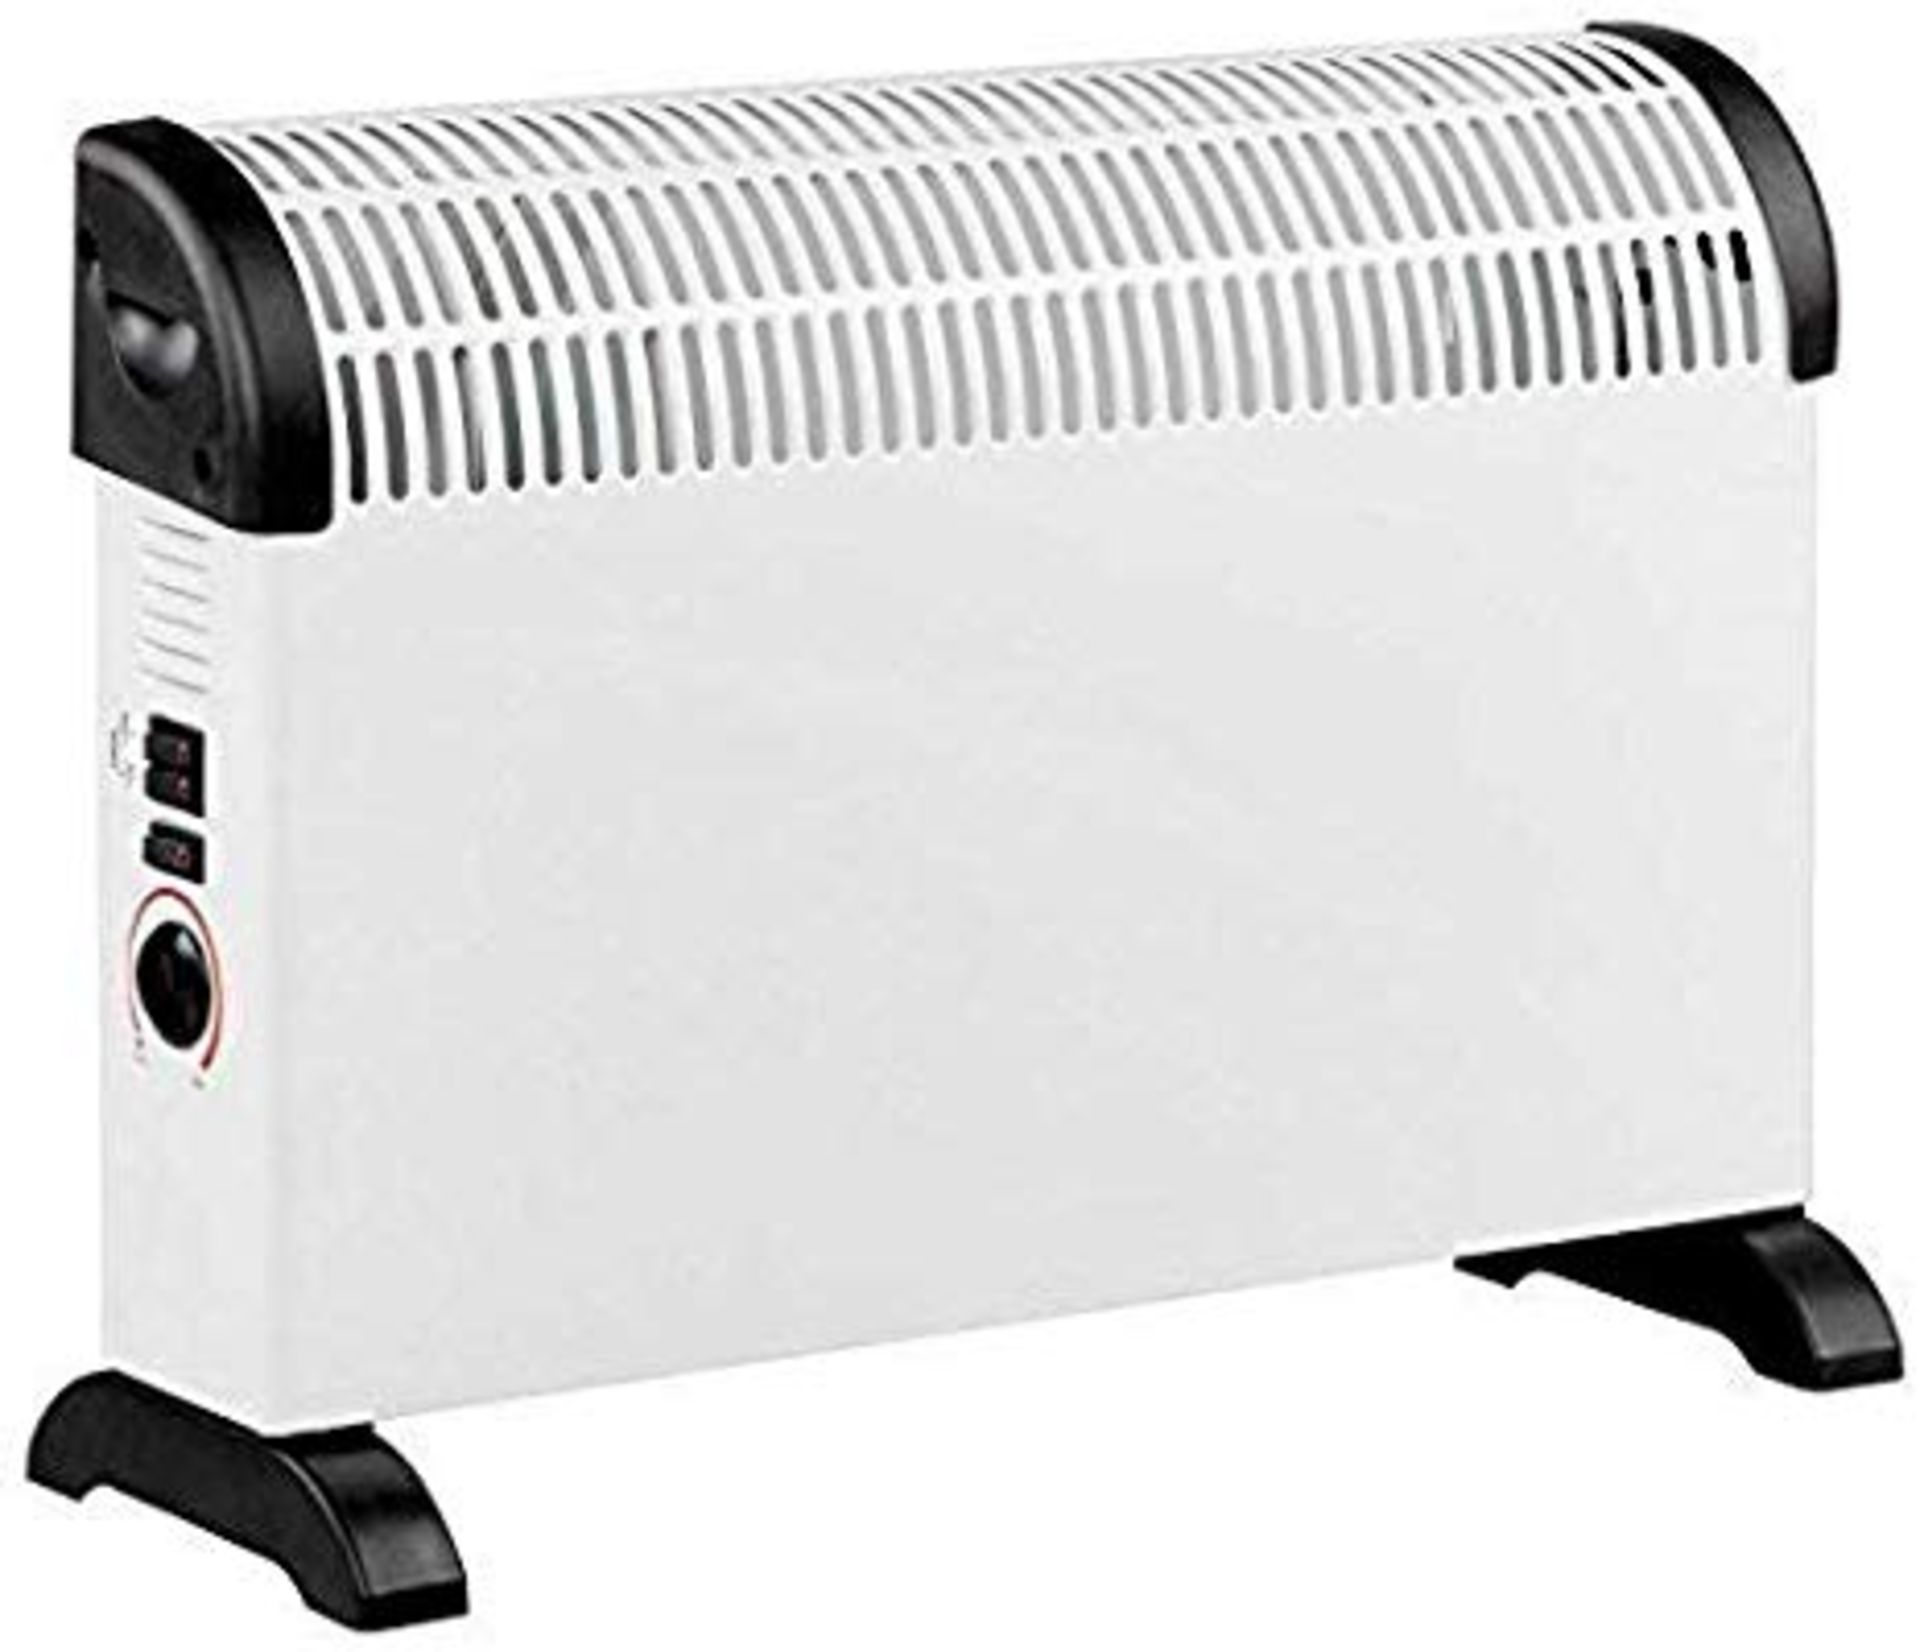 V Brand New 2000w Convector Heater-Turbo Boost-Overheat Protection-Adjustable Thermostat - white